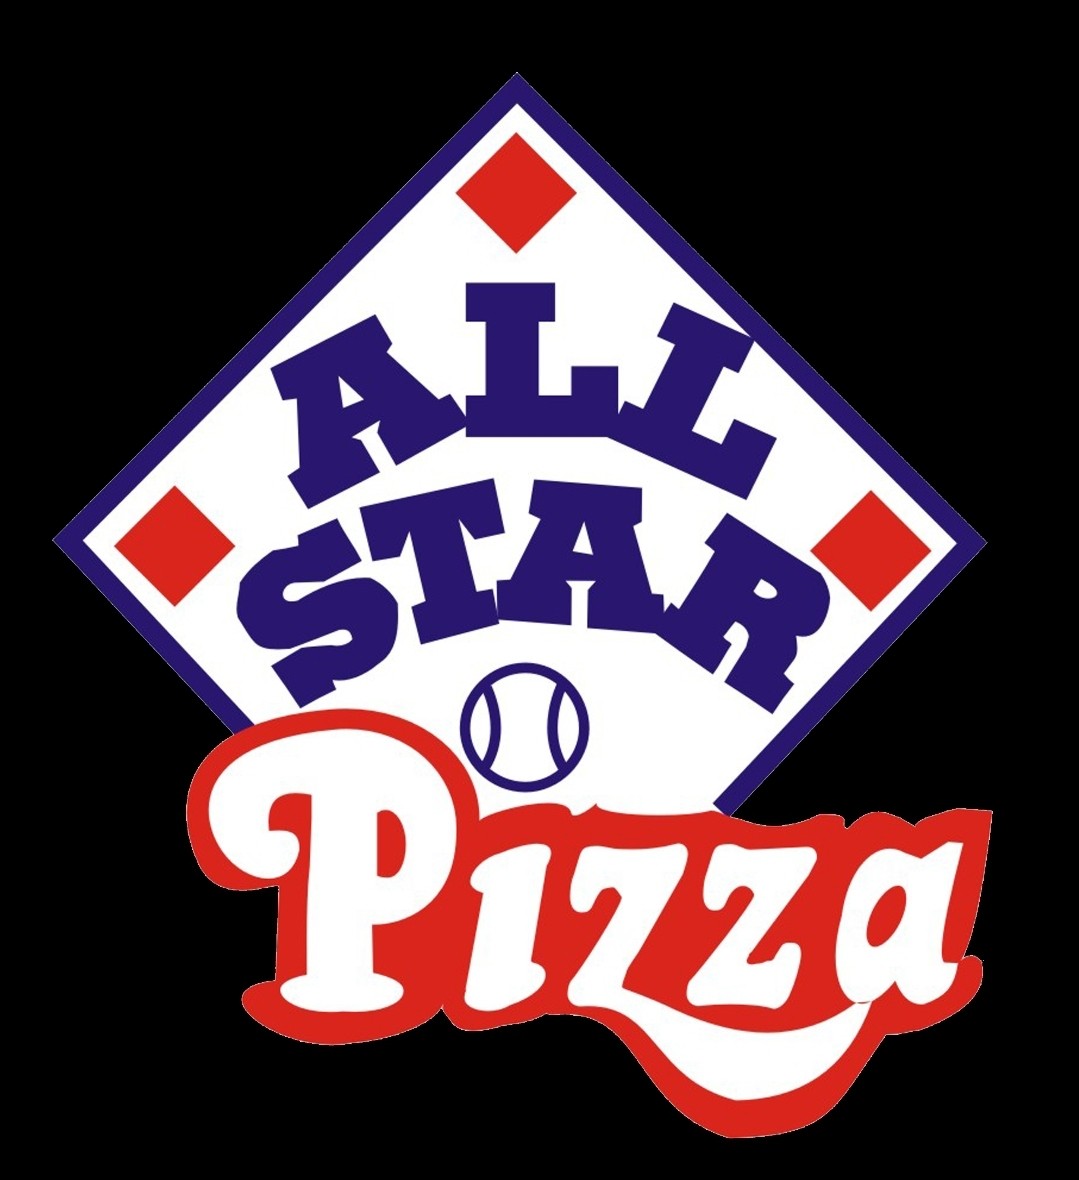 All Star Pizza 